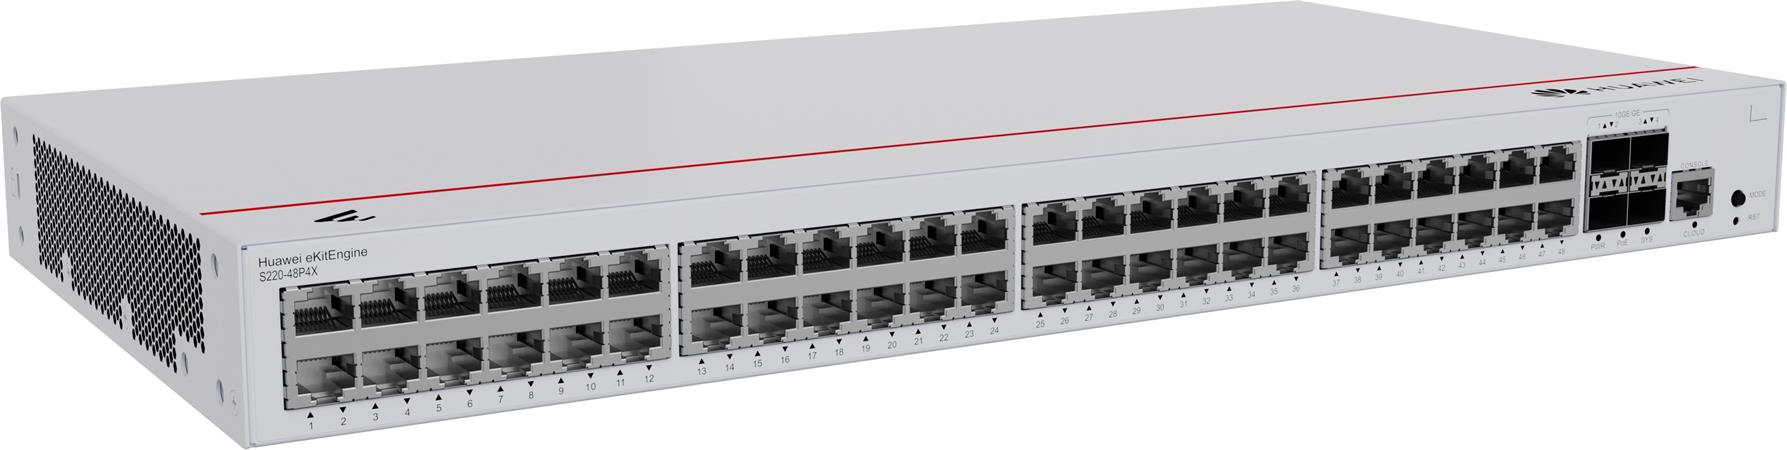 Huawei S220-48P4X Switch (48*GE ports(380W PoE+), 4*10GE SFP+ ports, built-in AC